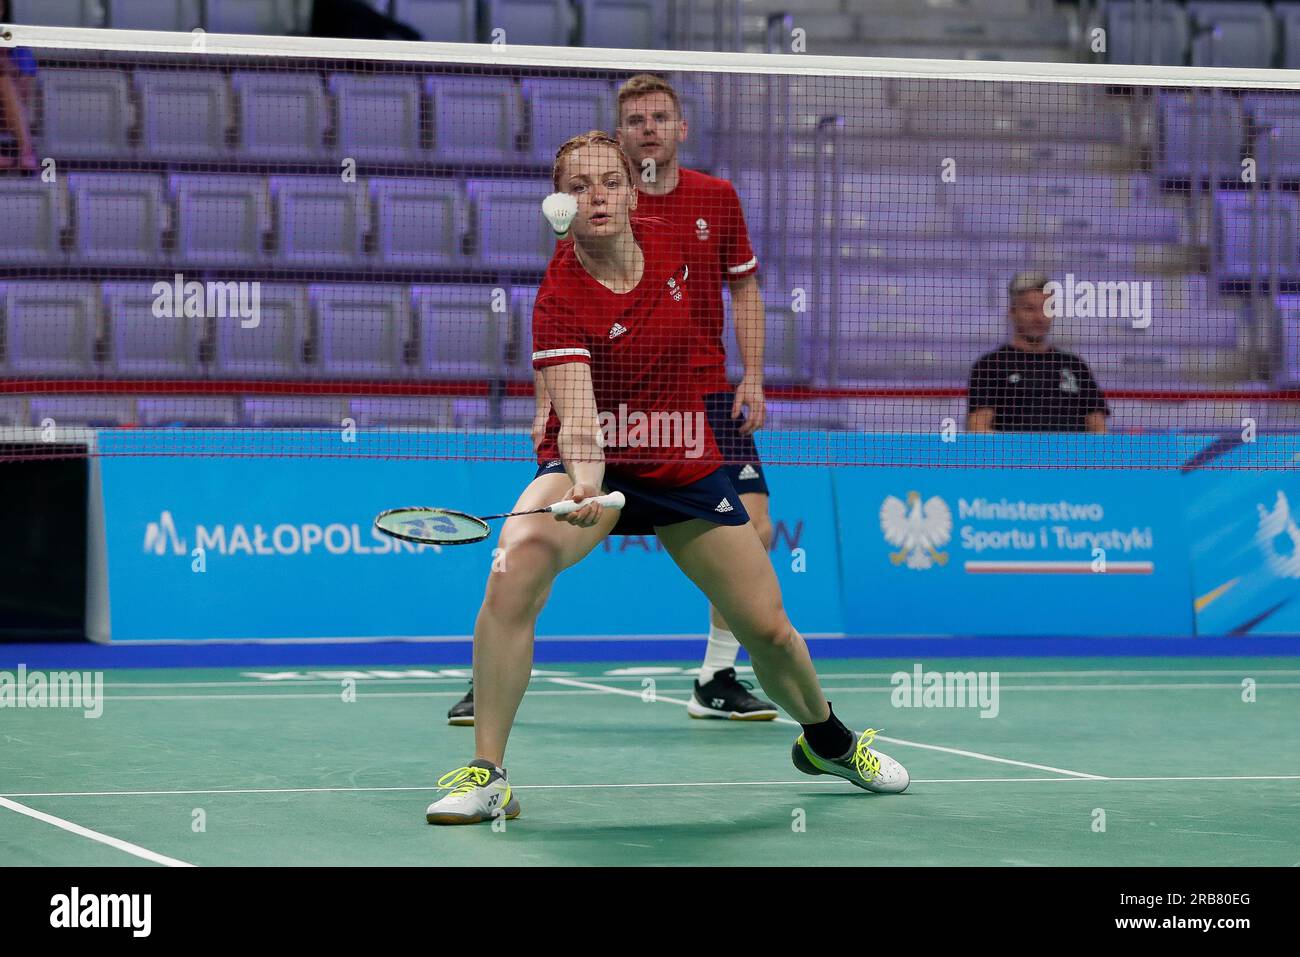 Tarnow, Slovenia. 26 June, 2023: Lauren Smith of Great Britain competes in  the Badminton - Mix Double match during the European Games - Day 7 at  Jaskolka Arena in Tarnow, Poland. June